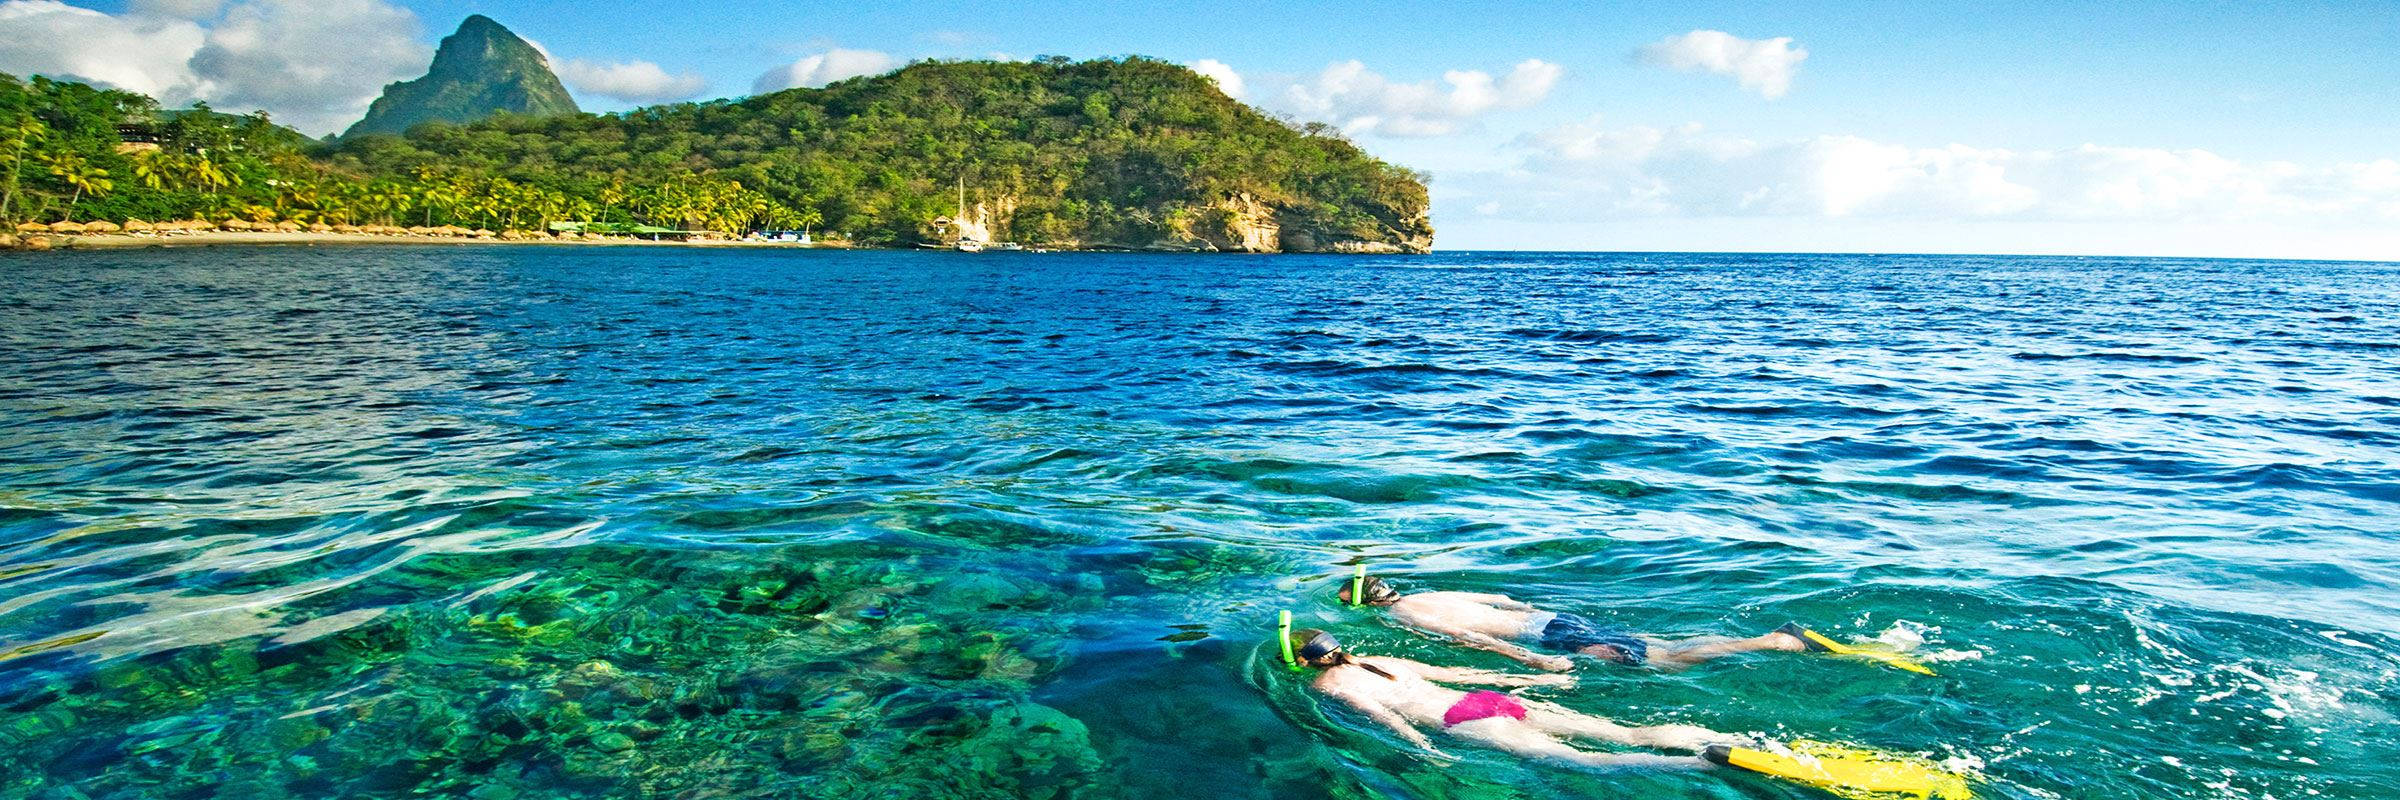 Snorkeling At St Lucia Wallpaper